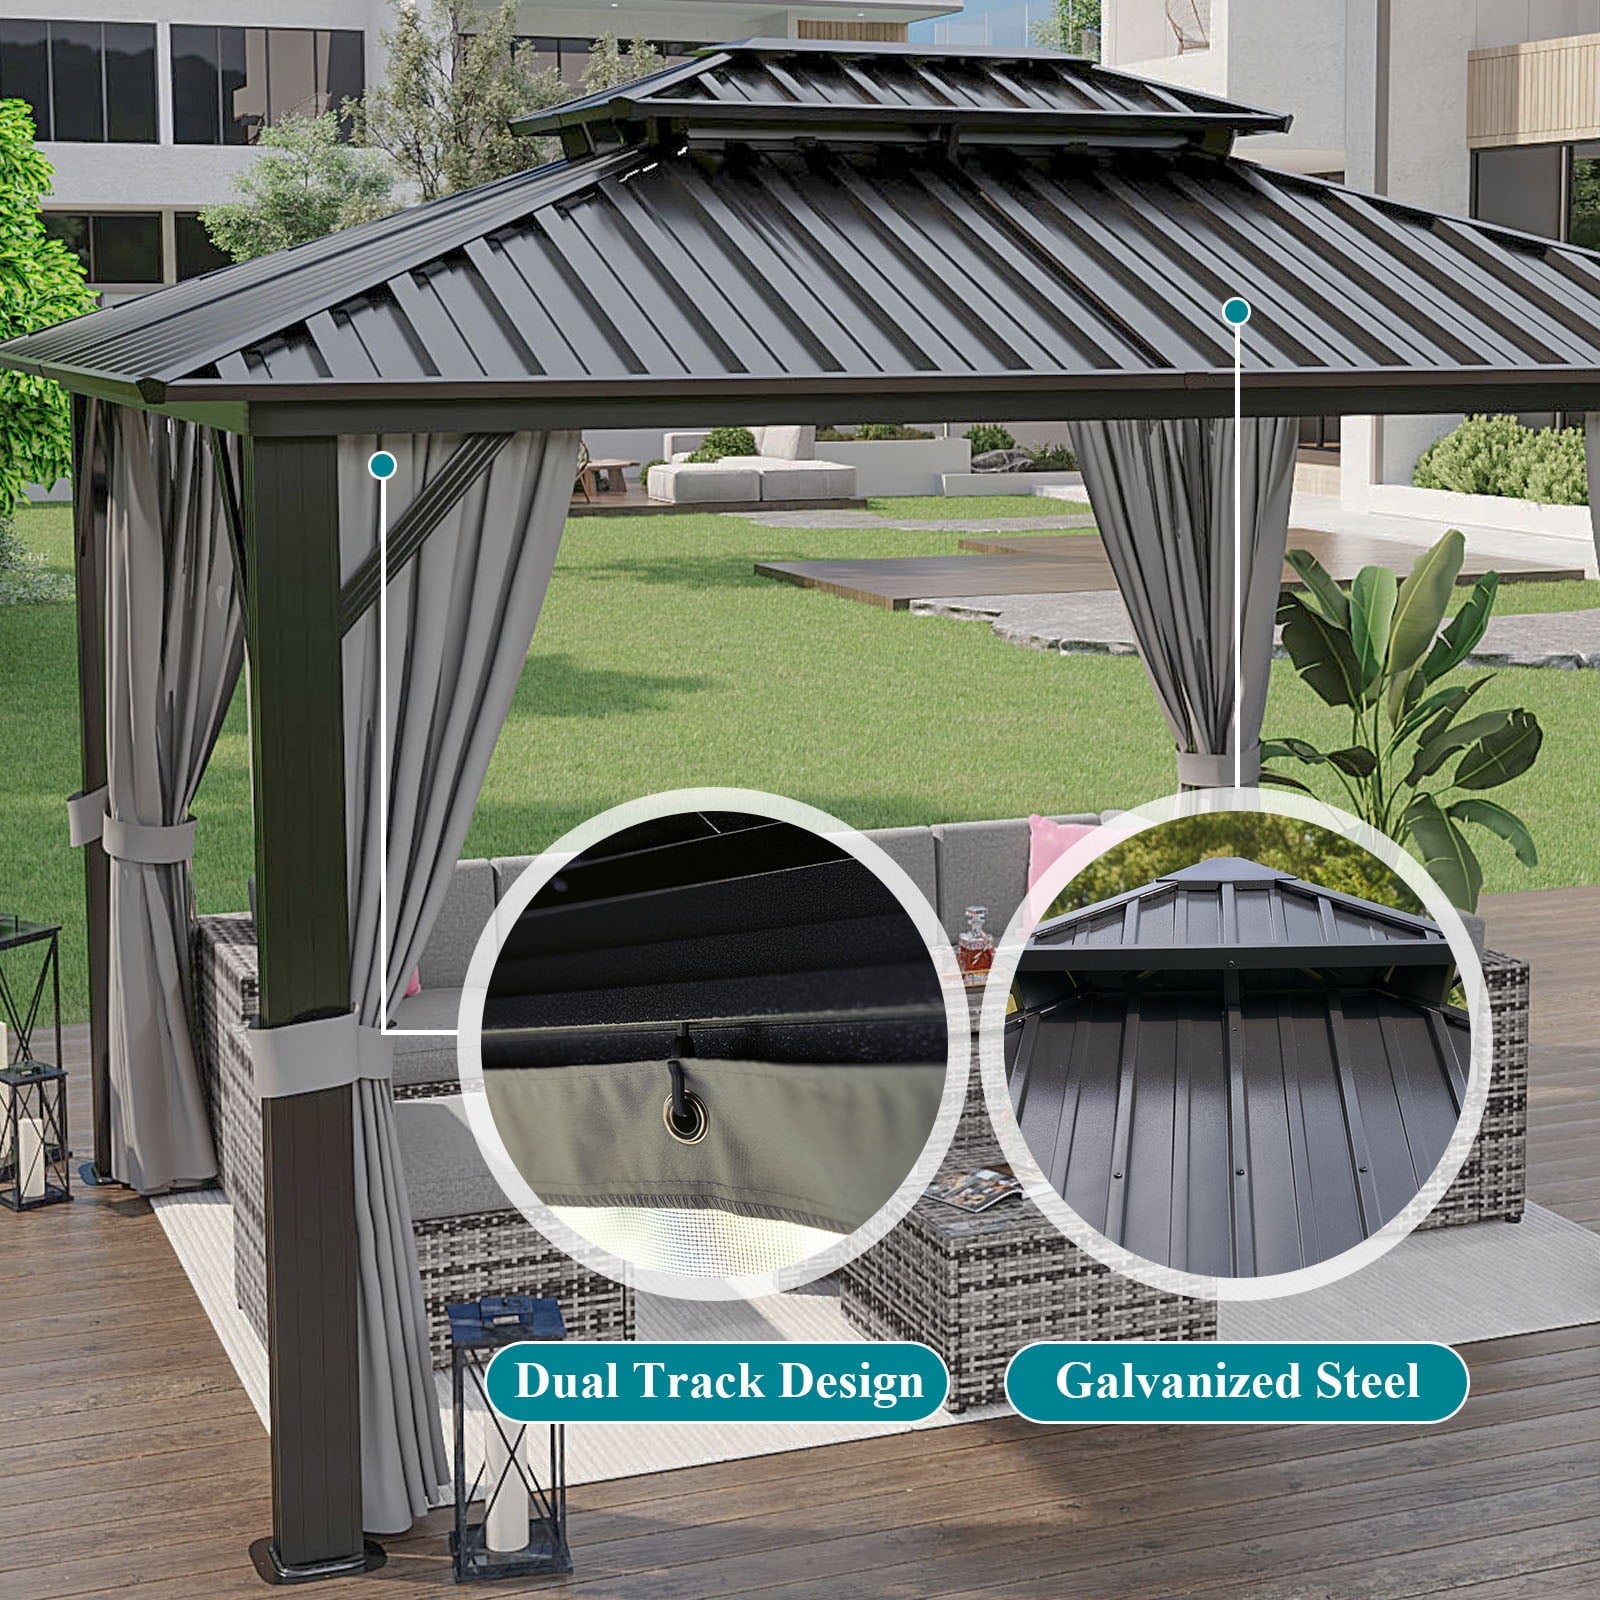 10'x12' Hardtop Gazebo, Outdoor Steel Double Roof Canopy, Aluminum Frame Permanent Pavilion with Curtains and Netting, Sunshade for Garden, Patio, Lawns, Black